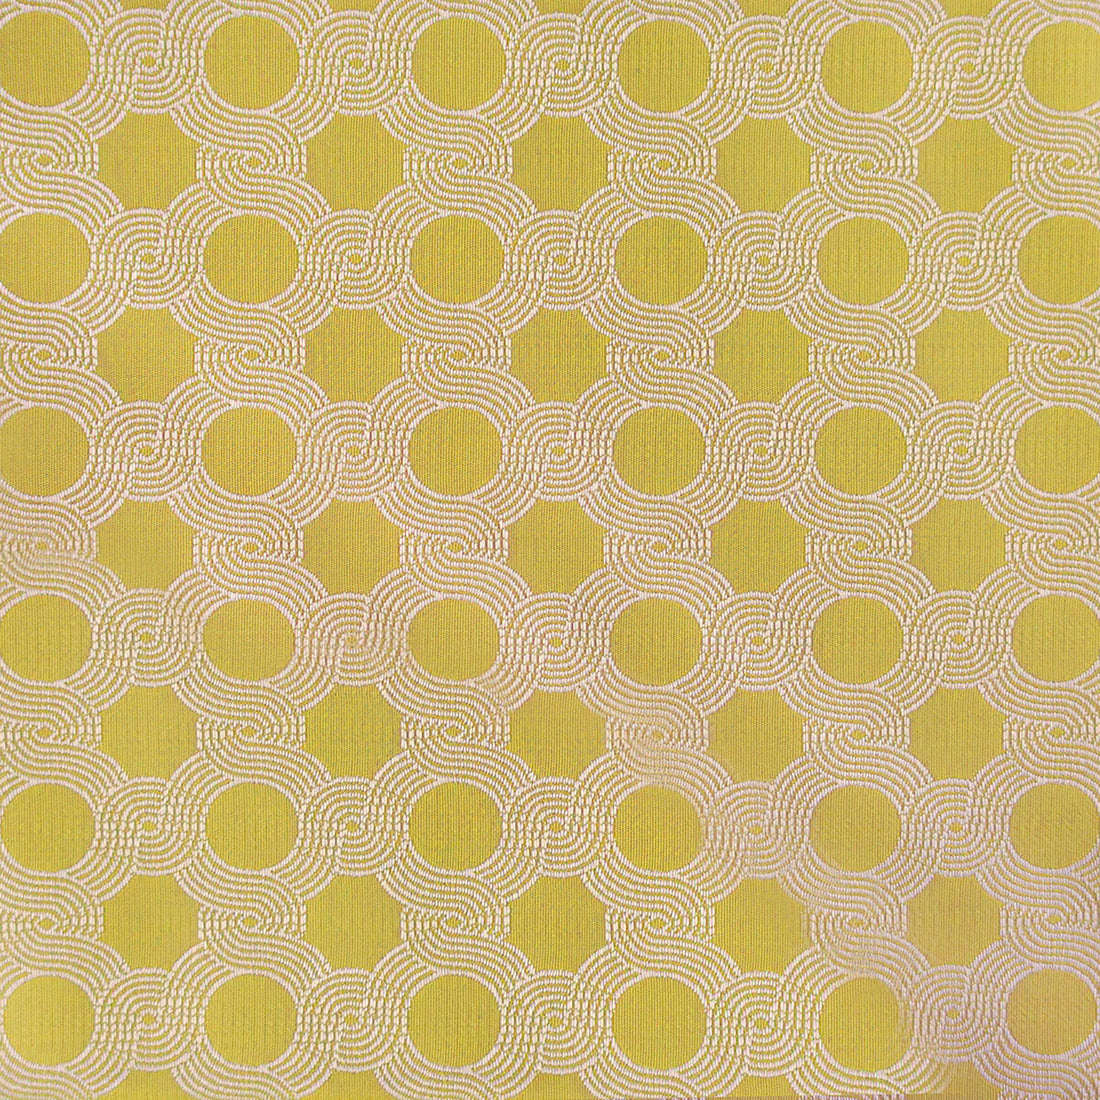 Nohara fabric in amarillo color - pattern GDT5641.003.0 - by Gaston y Daniela in the Gaston Japon collection